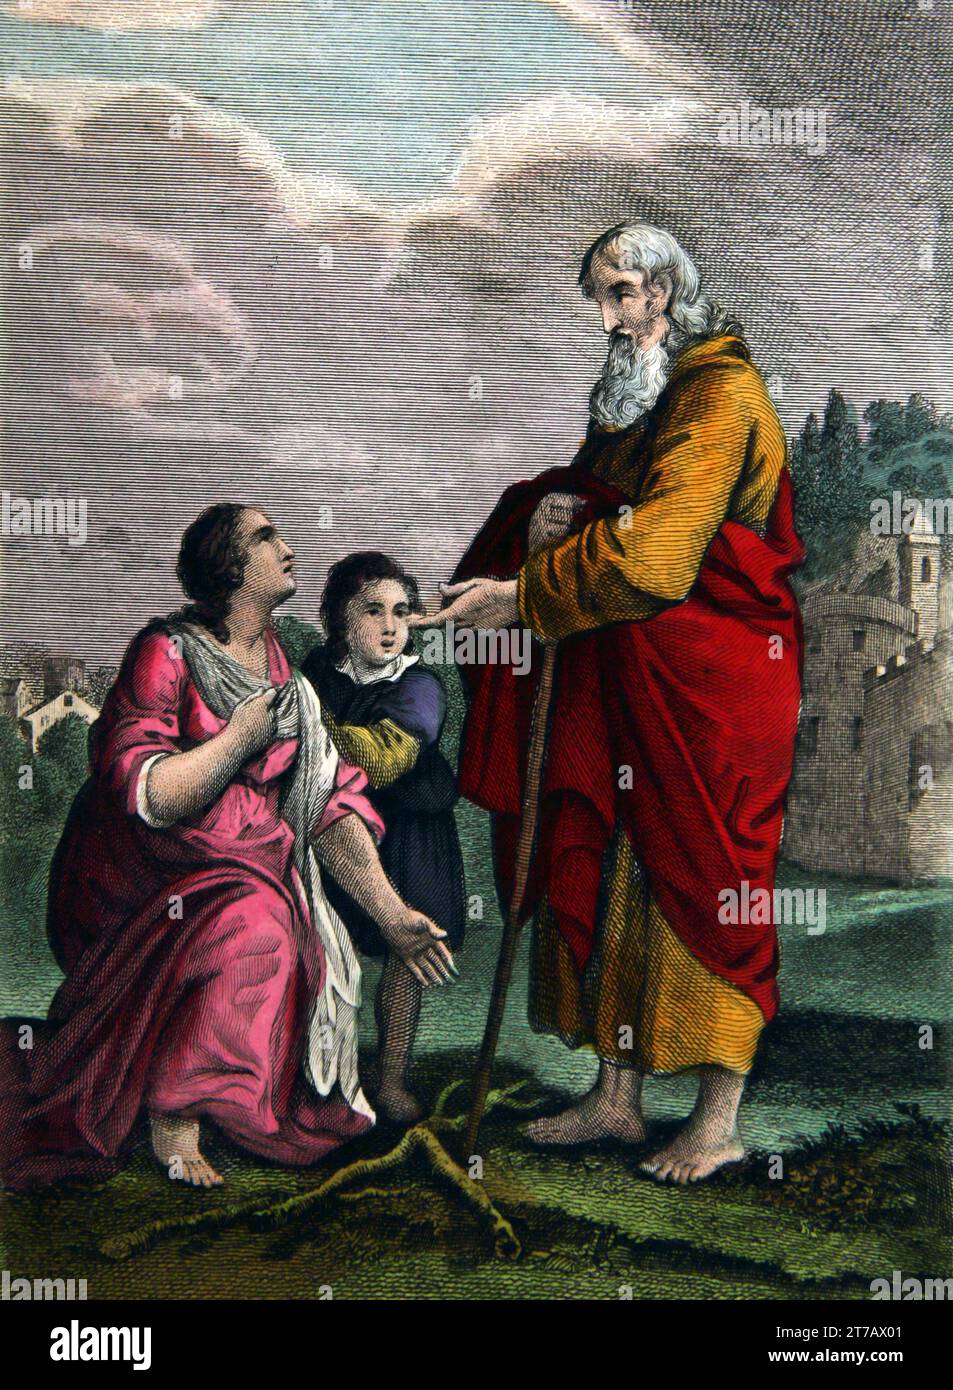 Illlustration Of Elijah Arriving At The Gate Of The City Asking The Widow For A Vessel Of Water (Kings) from the Self-Interpreting Family Bible Stock Photo